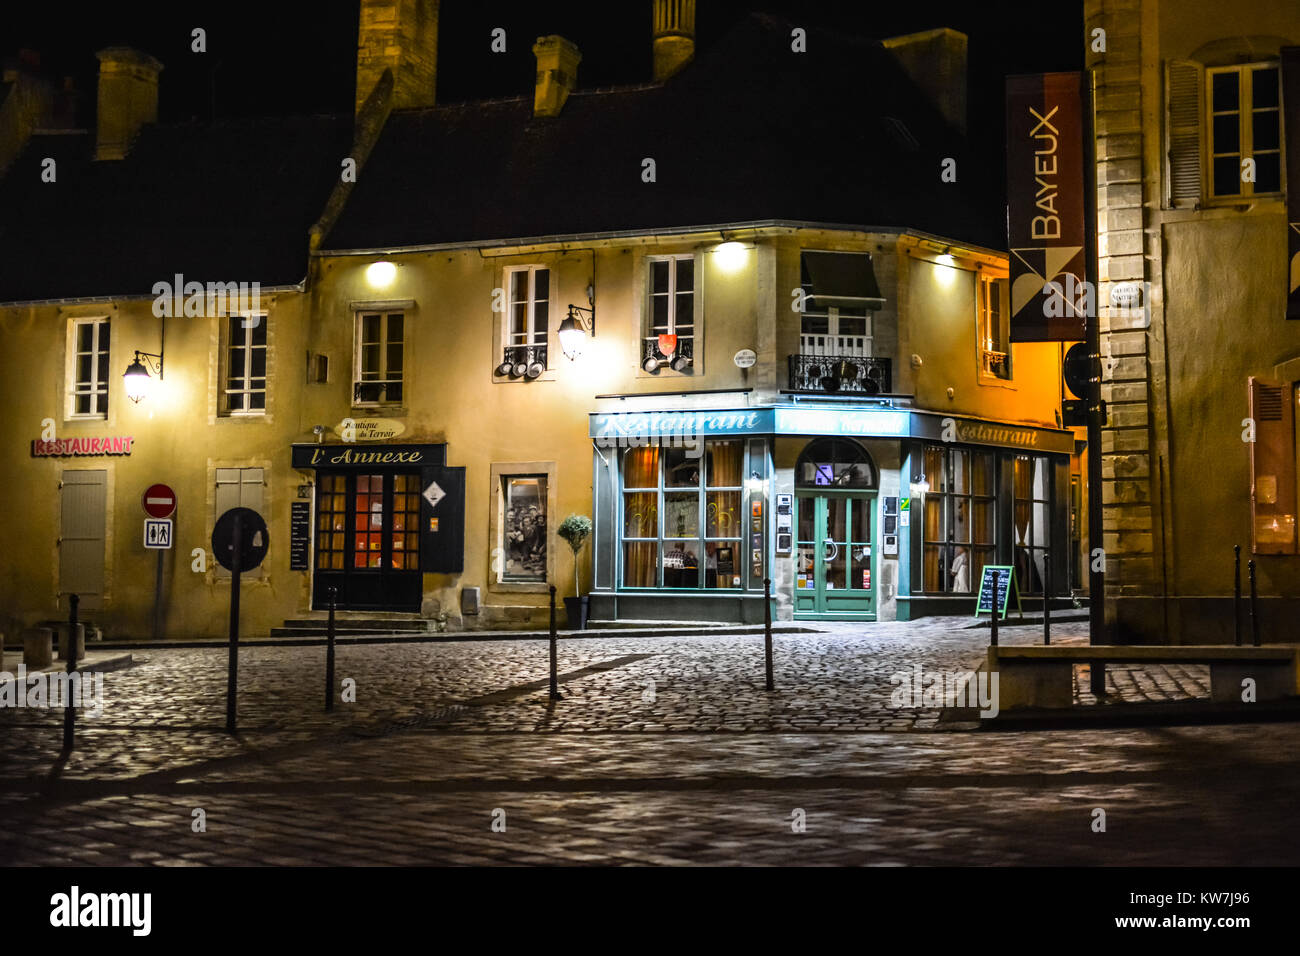 A restaurant lit up under the lights late at night on an empty street in the medieval city of Bayeux on the Normandy coast of France Stock Photo